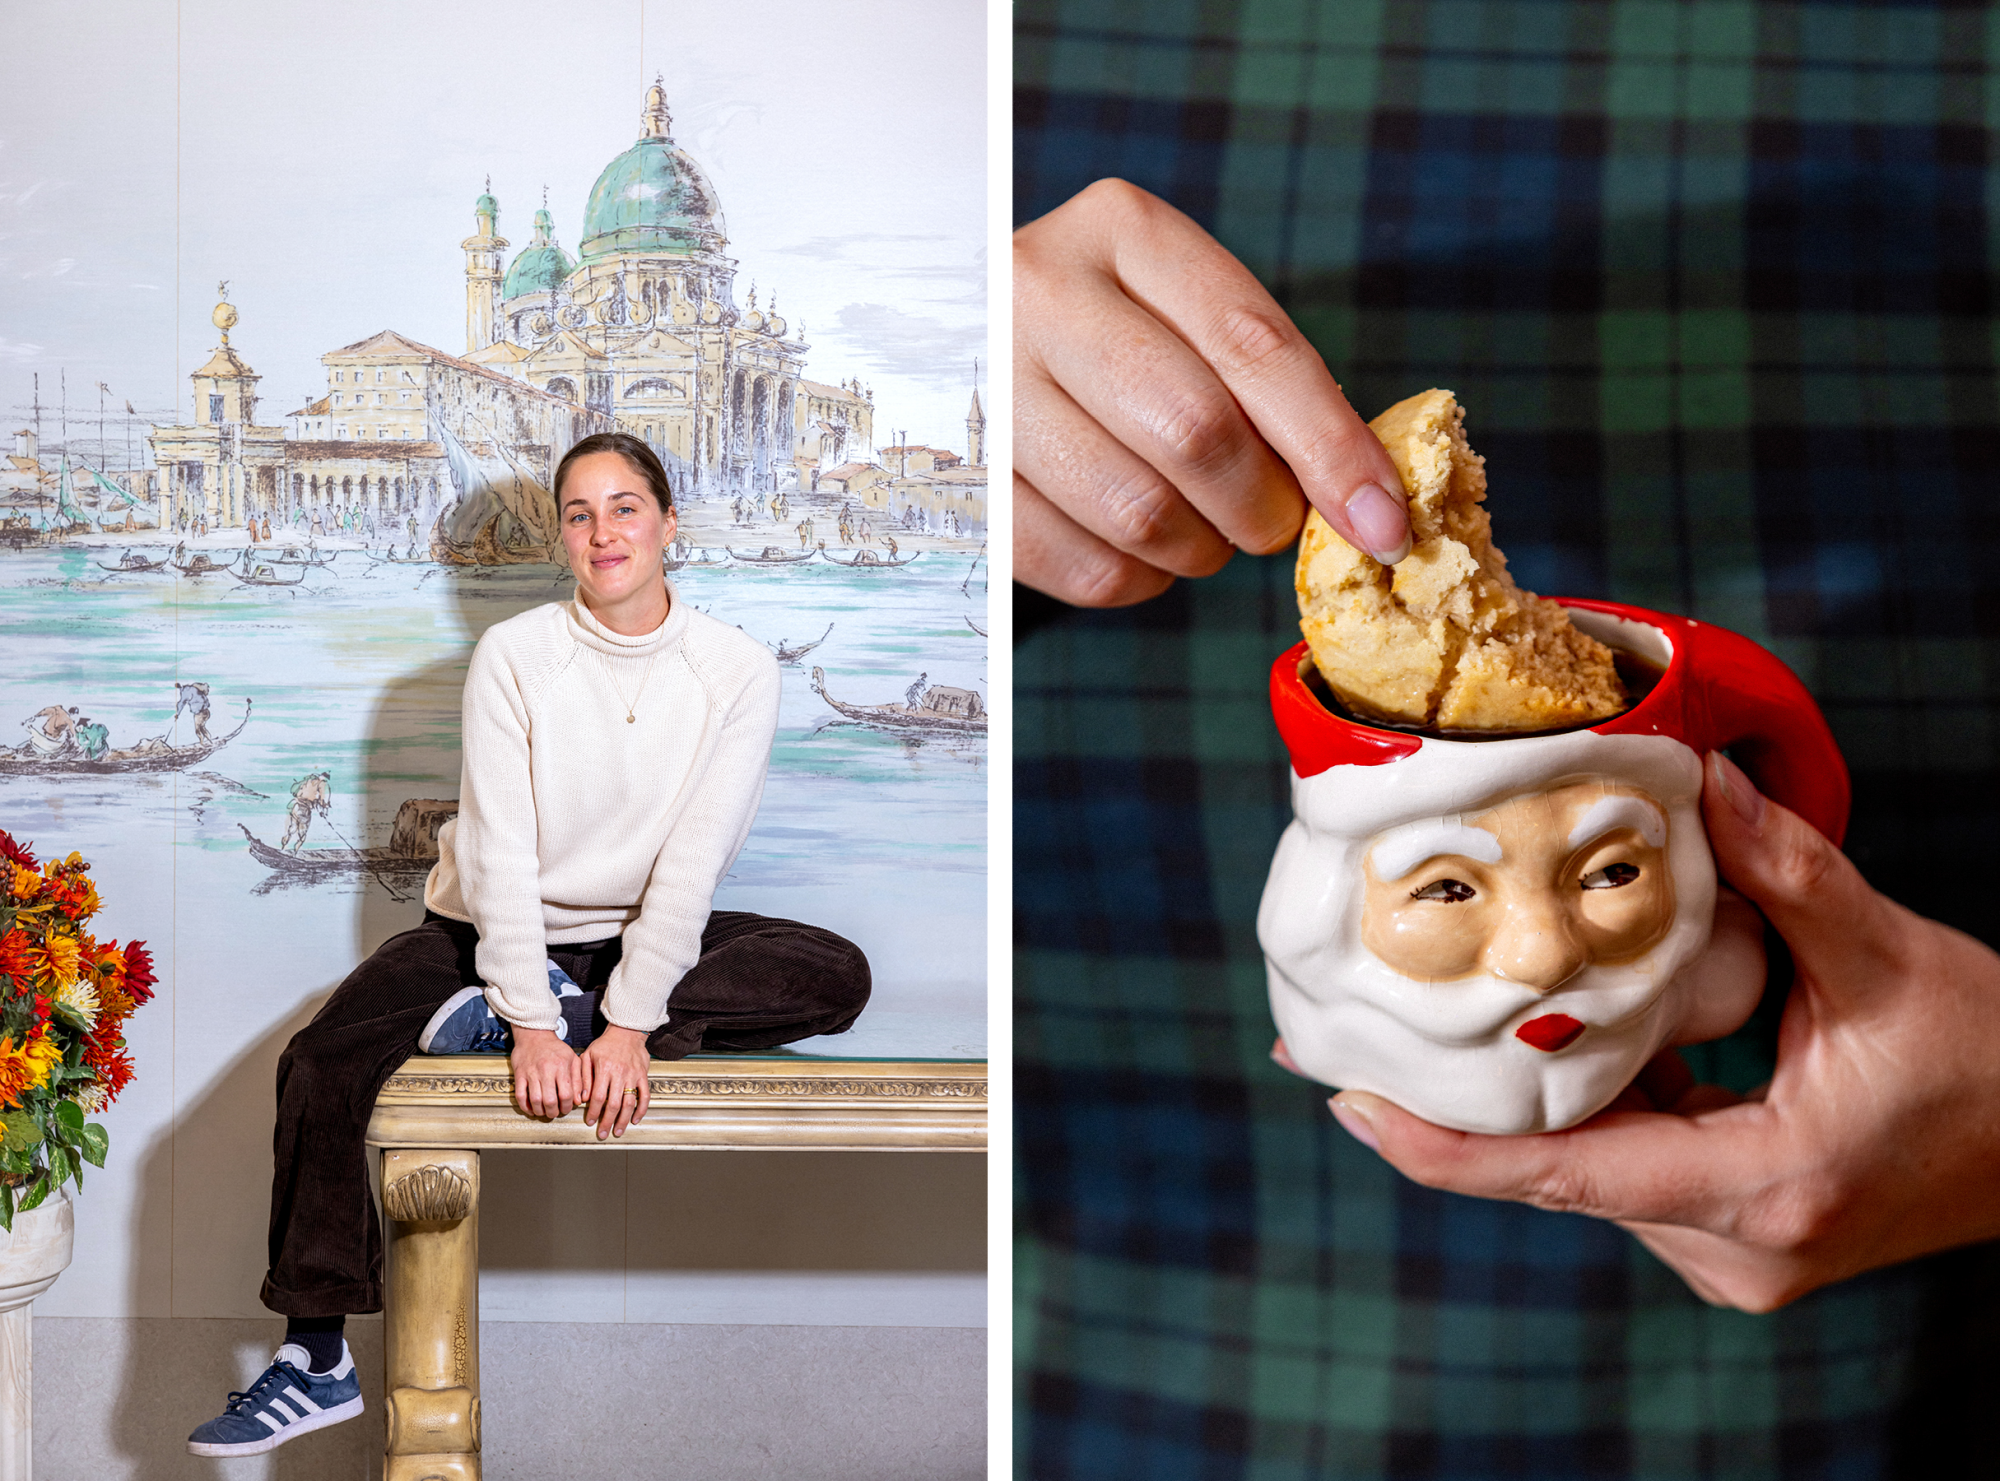 A woman seated in front of a mural of Venice, Italy; a hand dipping a cookie into a Santa head mug